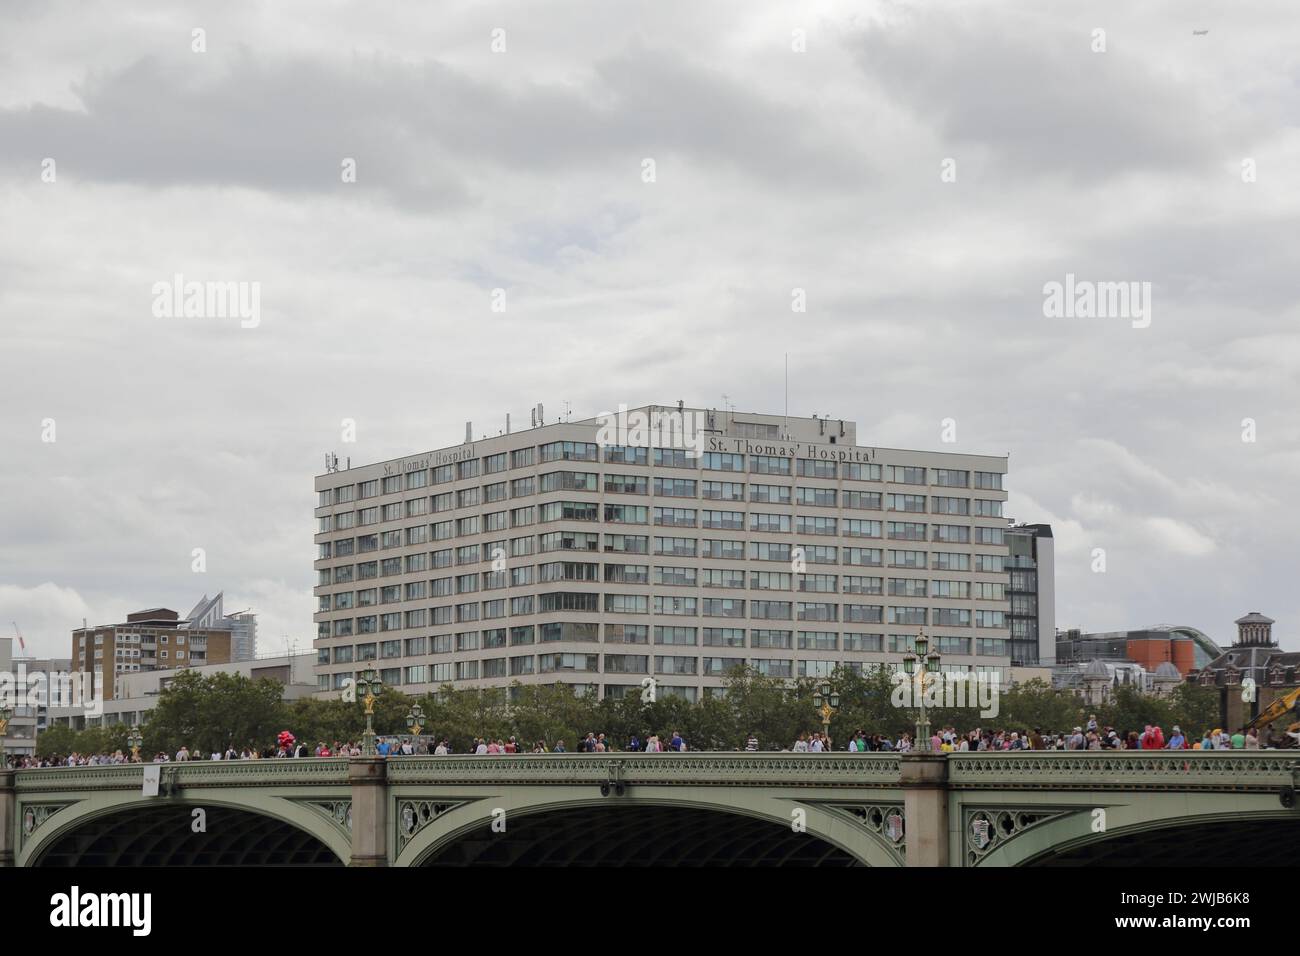 St Thomas' Hospital by the River Thames Stock Photo